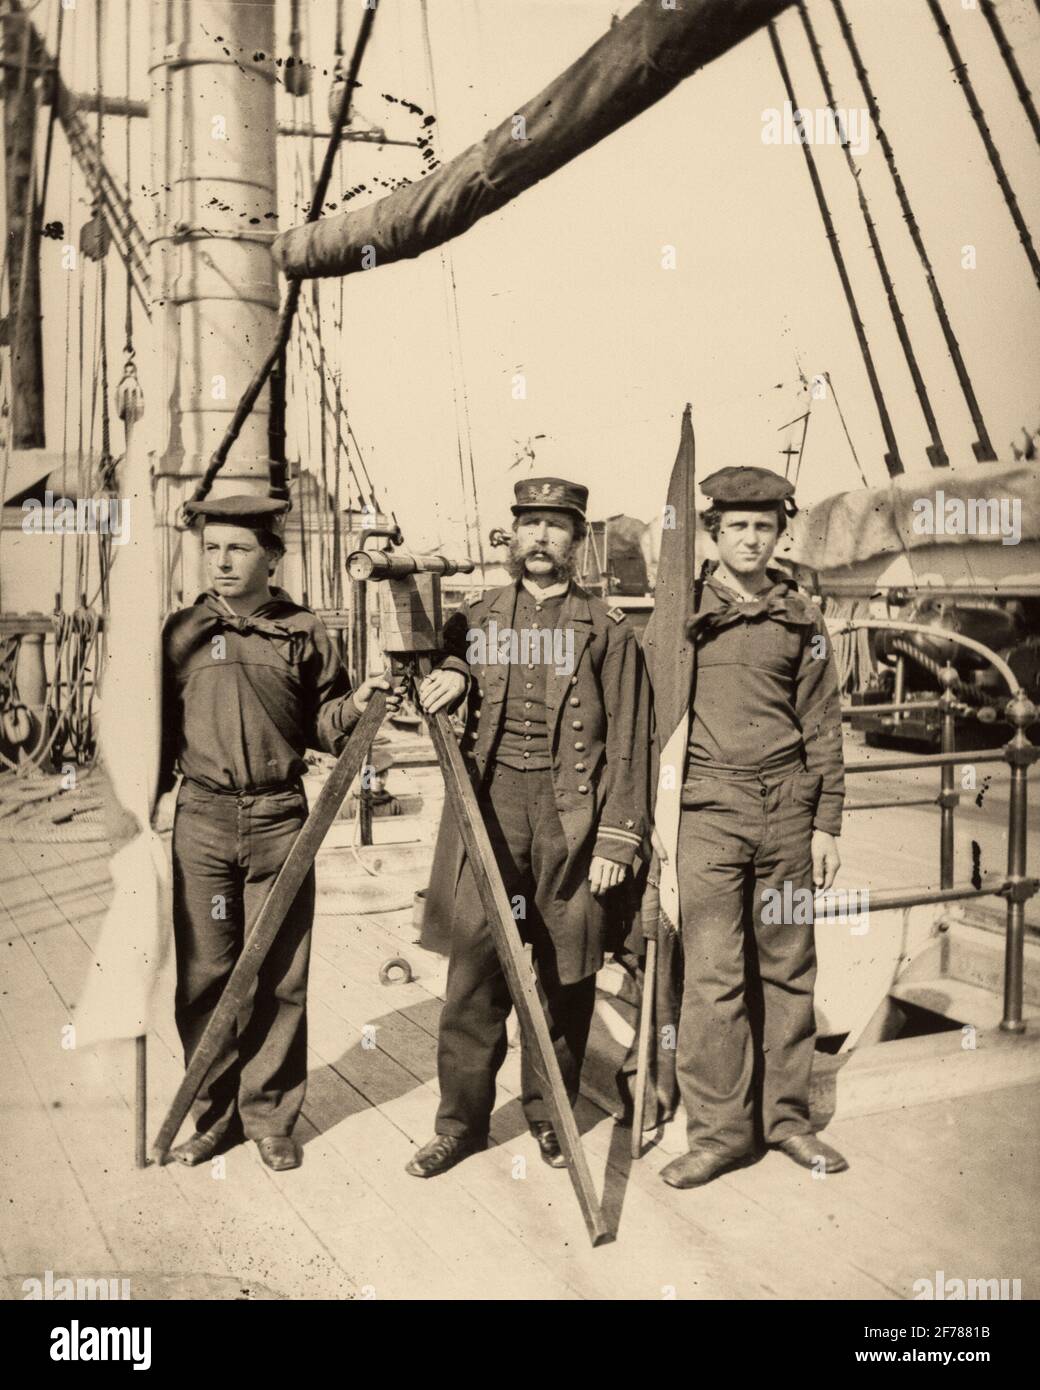 1800s 1860s SIGNAL STATION CREW WITH FLAGS TELESCOPE ON UNION STEAMER VERMONT AMERICAN CIVIL WAR OFFICER HAS TELESCOPE ON TRIPOD - h8915 SPL001 HARS CREW TEAMWORK SIGNAL INFORMATION BATTLE LIFESTYLE HISTORY CONFLICT NAVY TRANSPORT COPY SPACE PERSONS MALES RISK FORCE OFFICER TEENAGE BOY TRANSPORTATION TRIPOD 1800s B&W WARS UNION NAVAL AND SAILORS UNIFORMS FORCES 1860s NAVIES TEENAGED GUNBOAT USN JUVENILES STEAMER AMERICAN CIVIL WAR BATTLES BLACK AND WHITE CAUCASIAN ETHNICITY CIVIL WAR CONFLICTS MESSAGE OLD FASHIONED Stock Photo